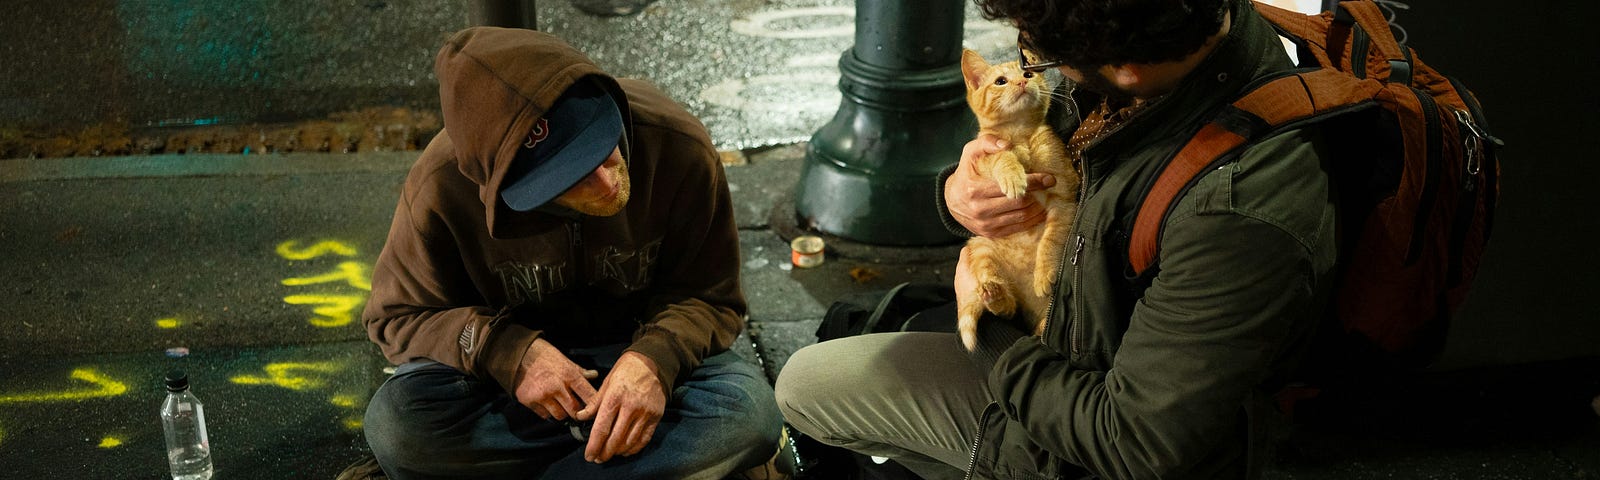 pic of 2 homeless people- with one holding a kitty